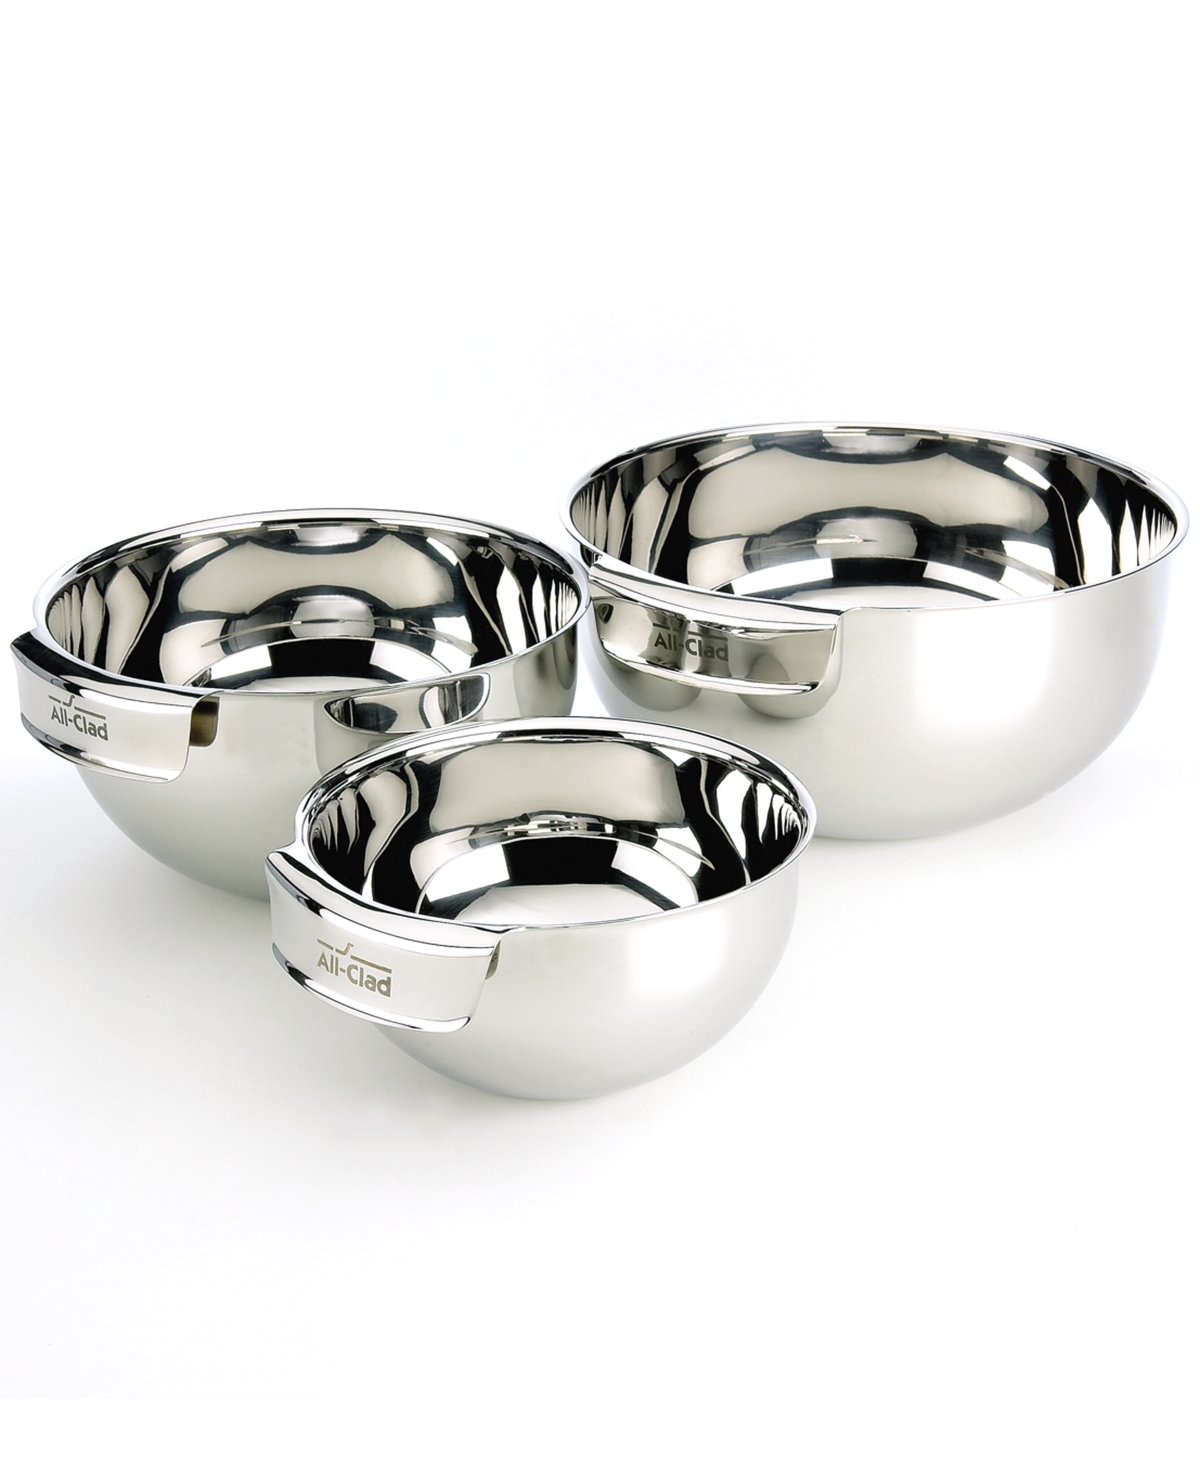 80999 All-Clad Stainless Steel 3 Piece Mixing Bowl Set sku 80999